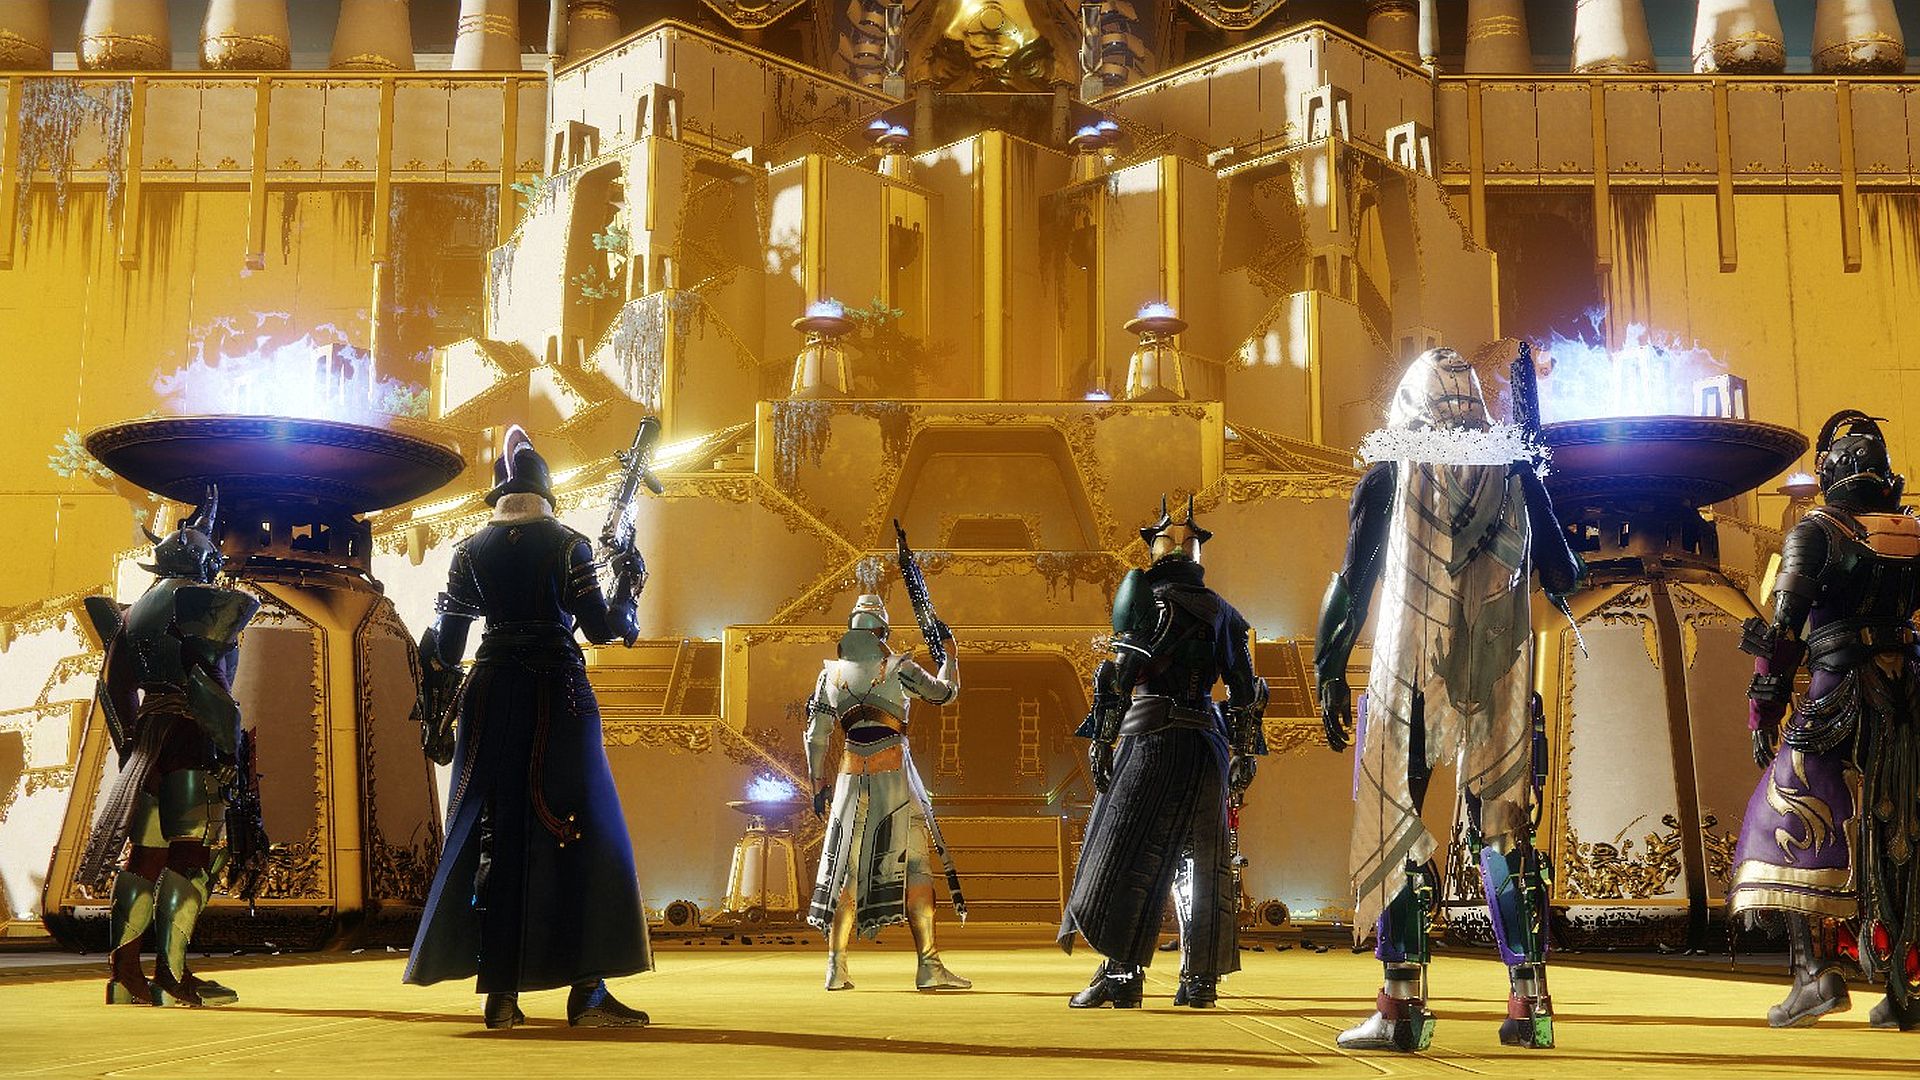 All Destiny 2 raids in release order - Listed